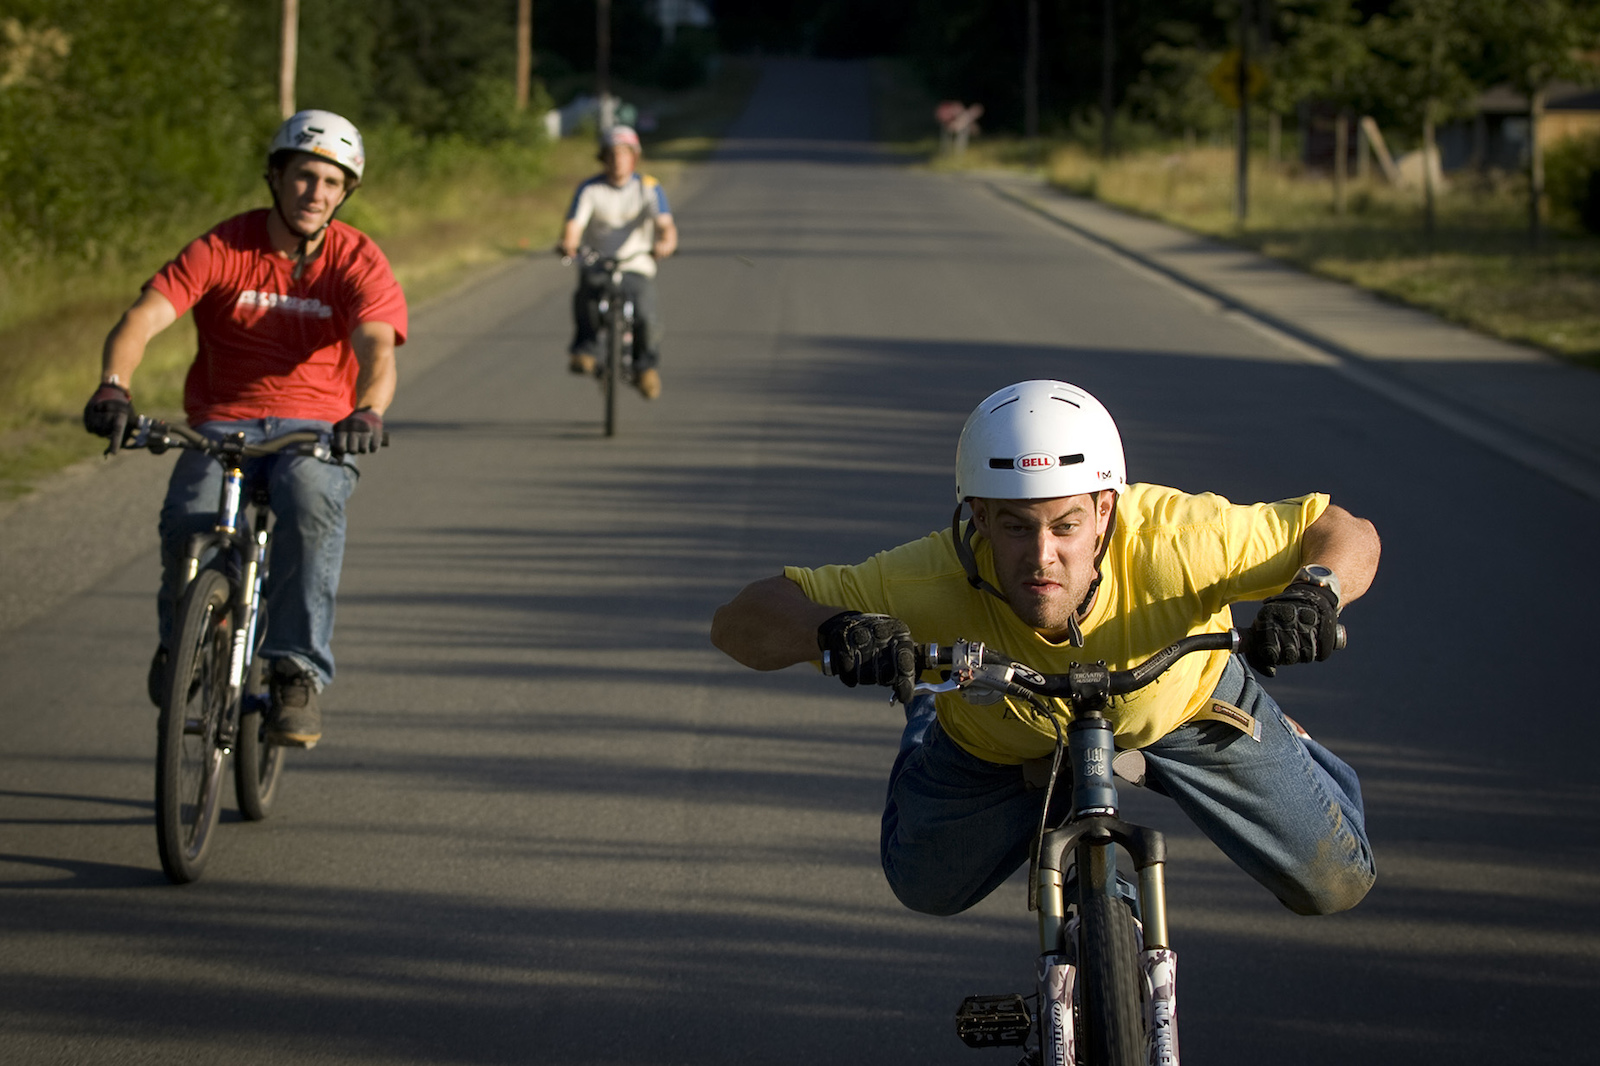 Jordie Lunn with Cam McCaul and Ryder Kasprick, Parksville, BC, while filming for Roam in 2006